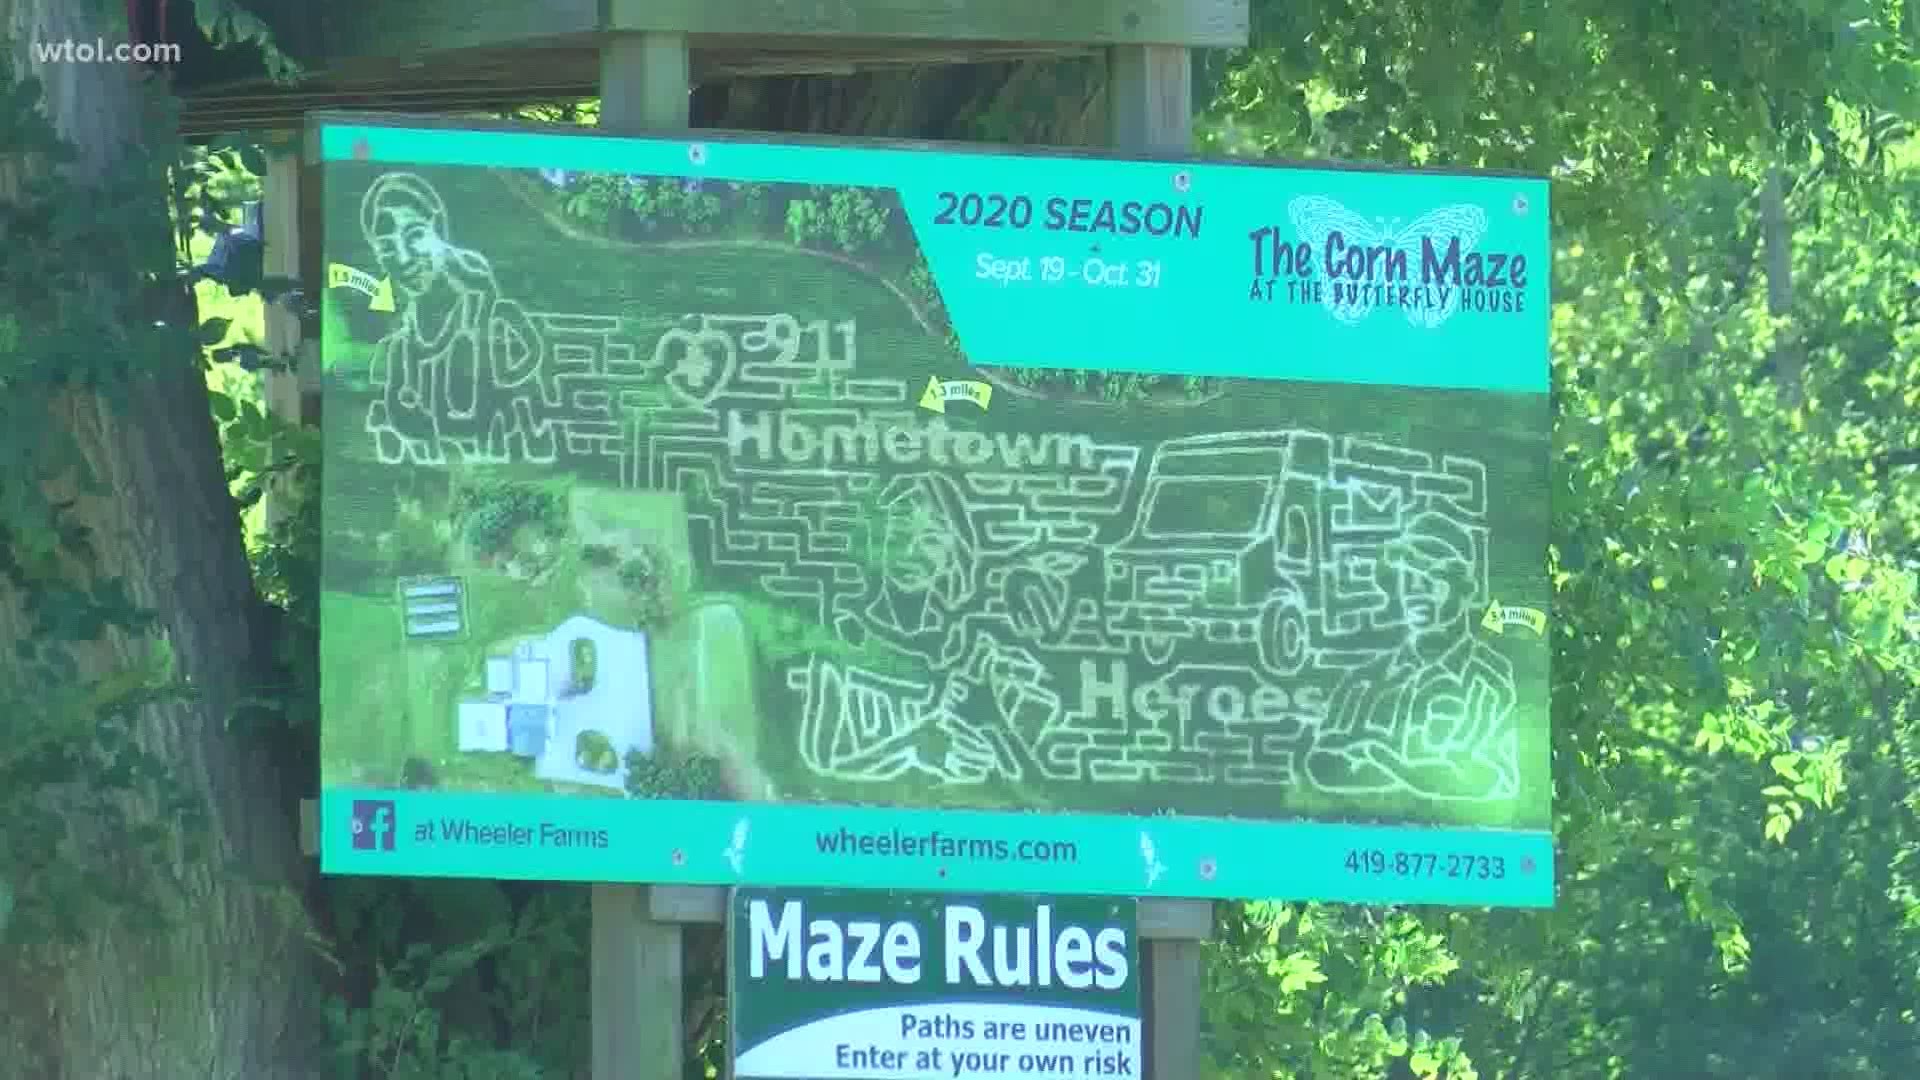 The popular corn maze opened over the weekend. 2020's theme is 'Hometown Heroes,' honoring medical professionals, teachers and delivery services workers.